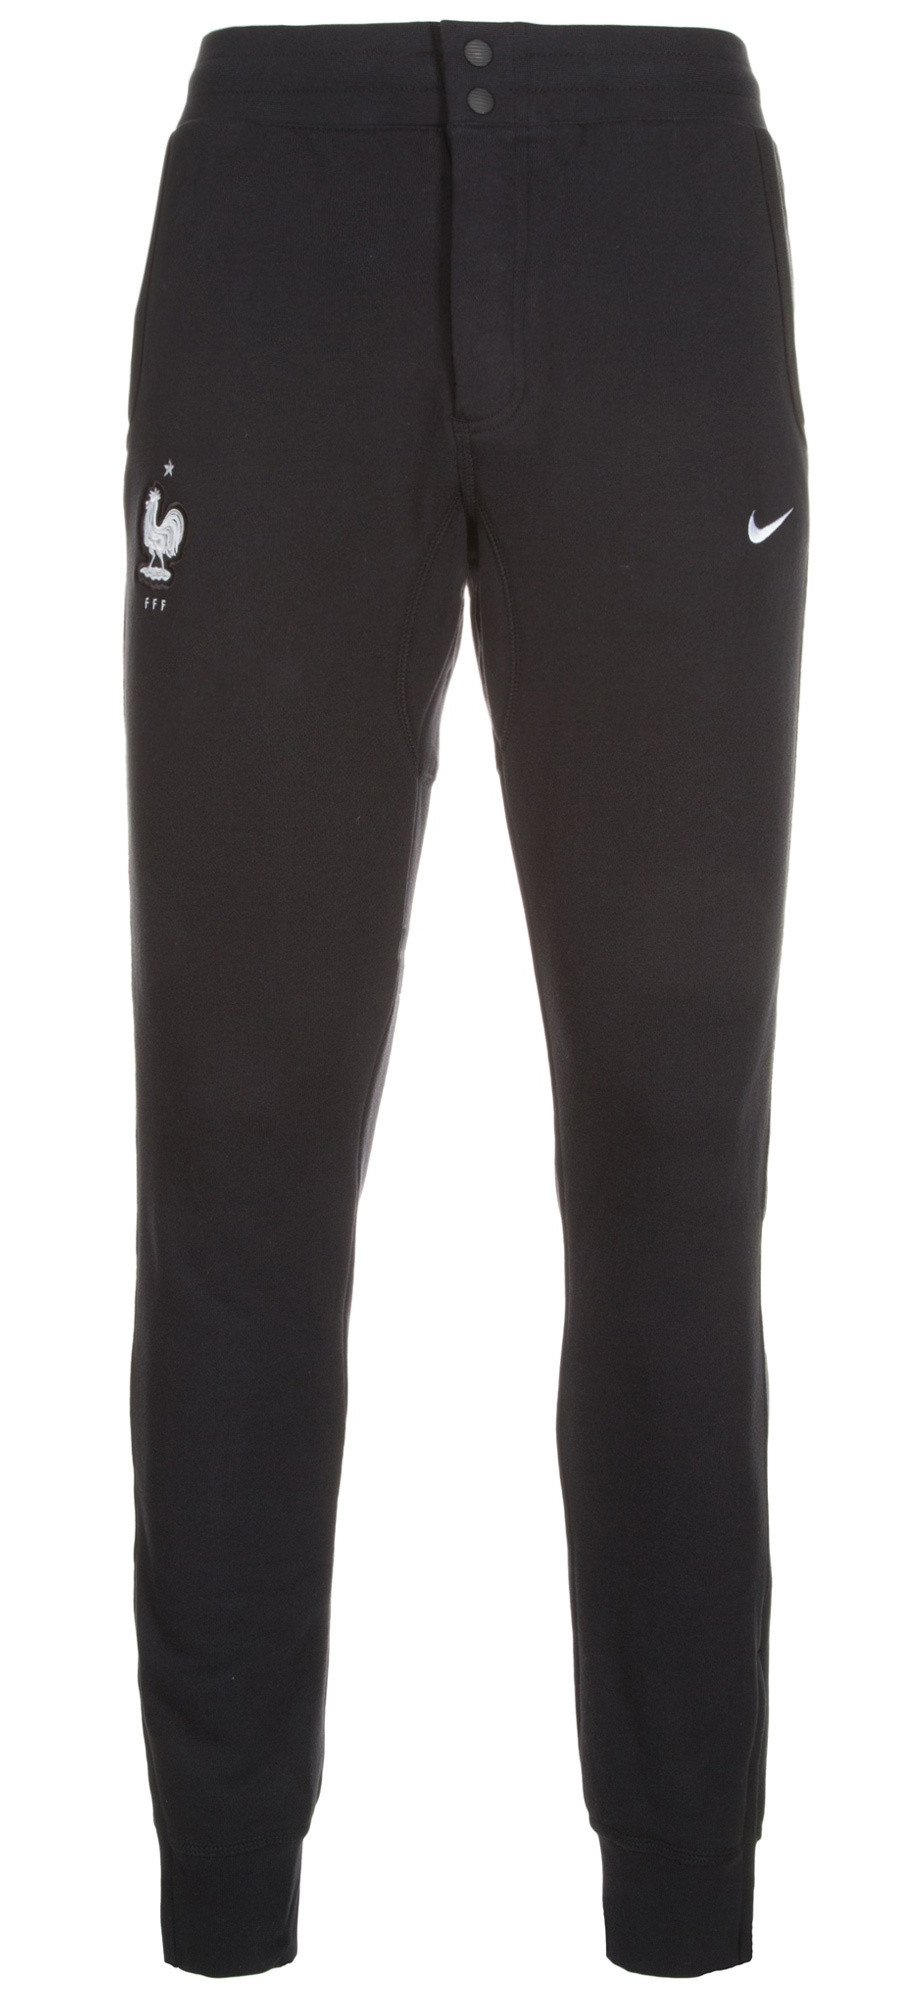 Nohavice Nike FFF AUTH V442 FT PANT